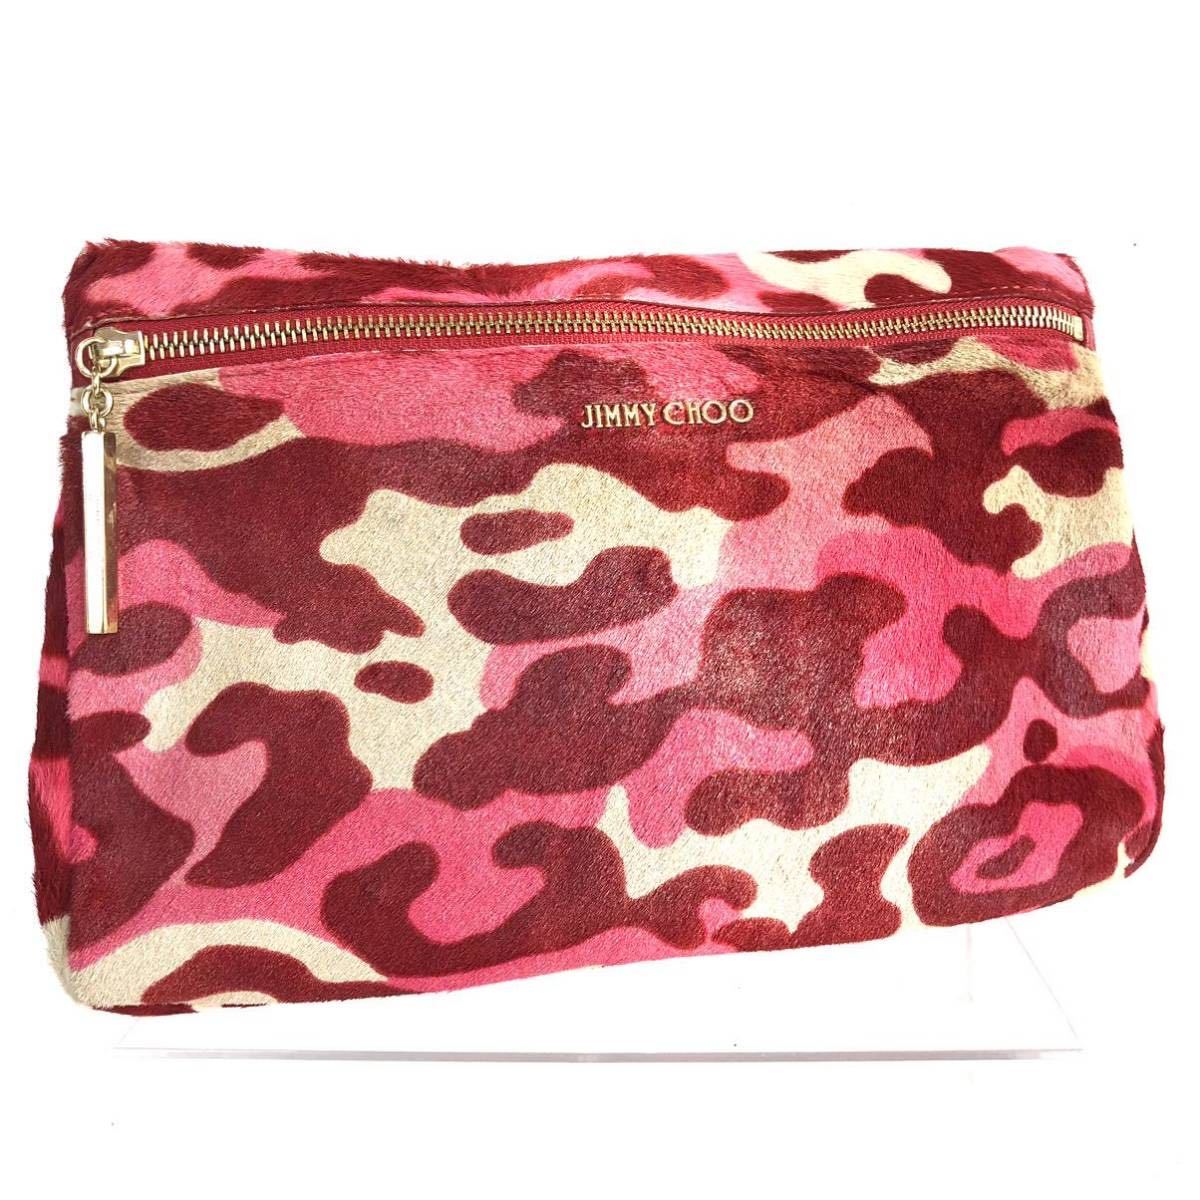 # beautiful goods #JIMMY CHOO Jimmy Choo clutch bag is lako leather Leopard animal red × pink Italy made 